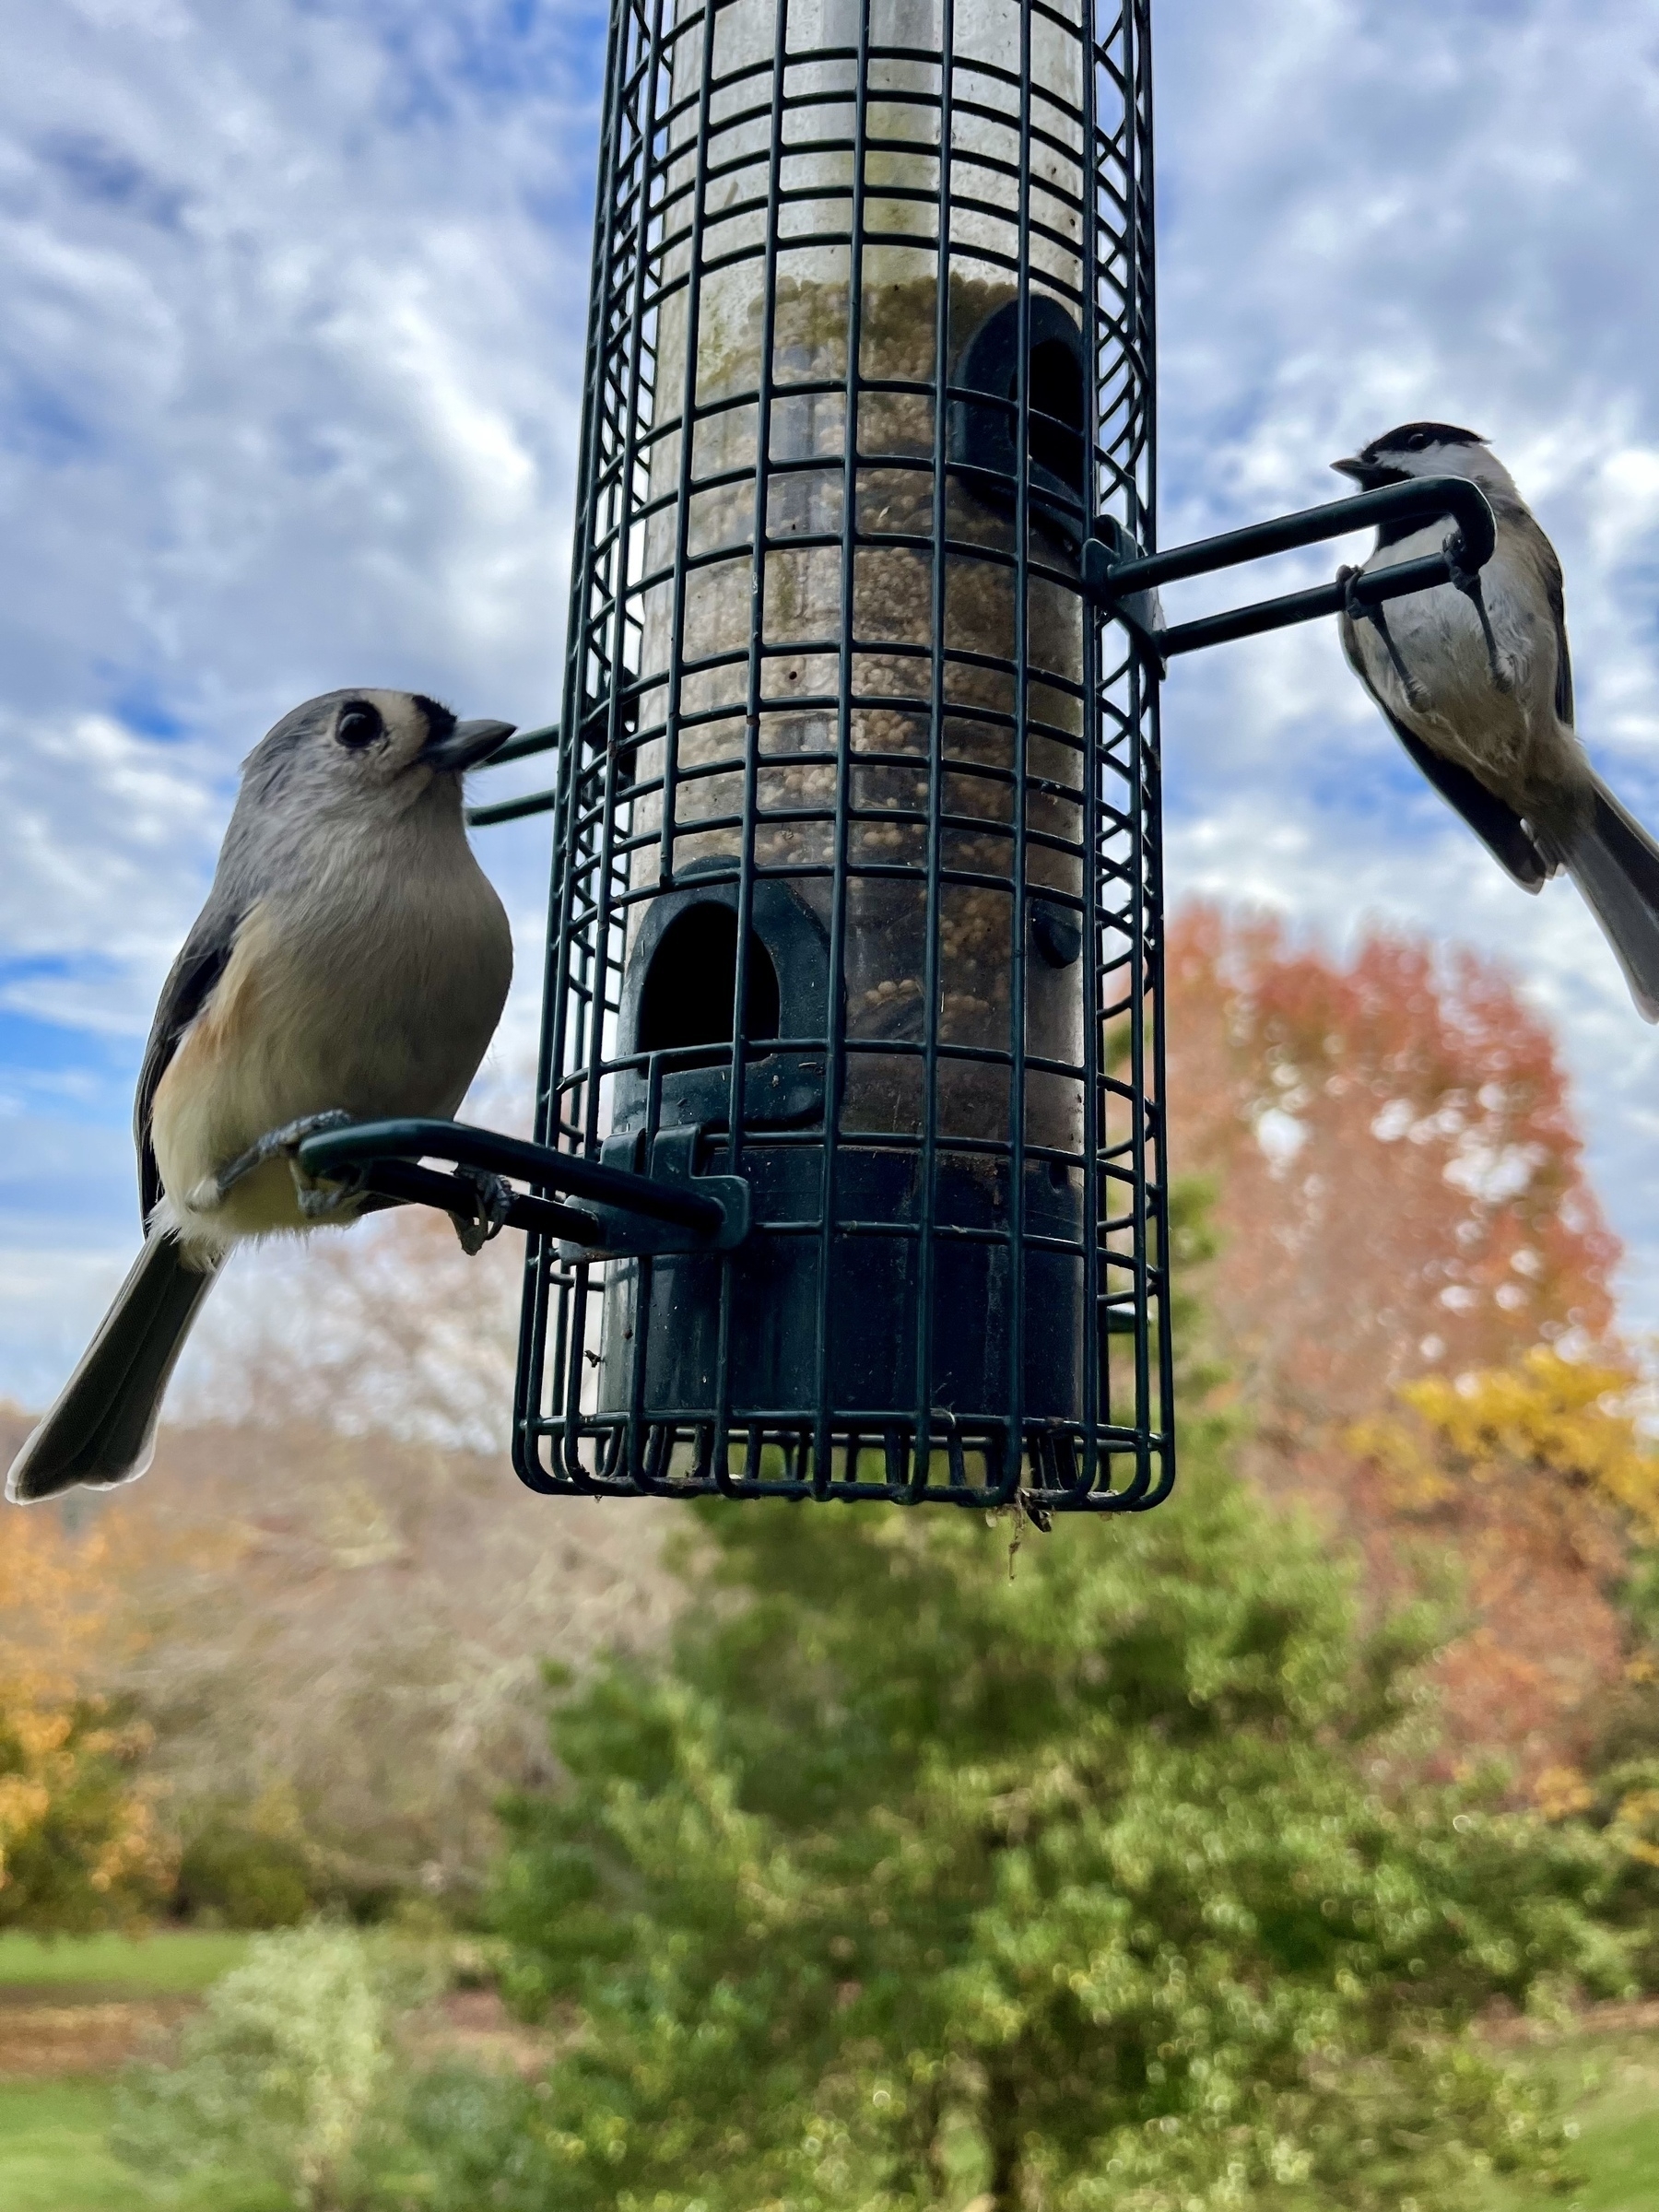 Tufted titmouse on the left and a chickadee on the right of a bird feeder. 